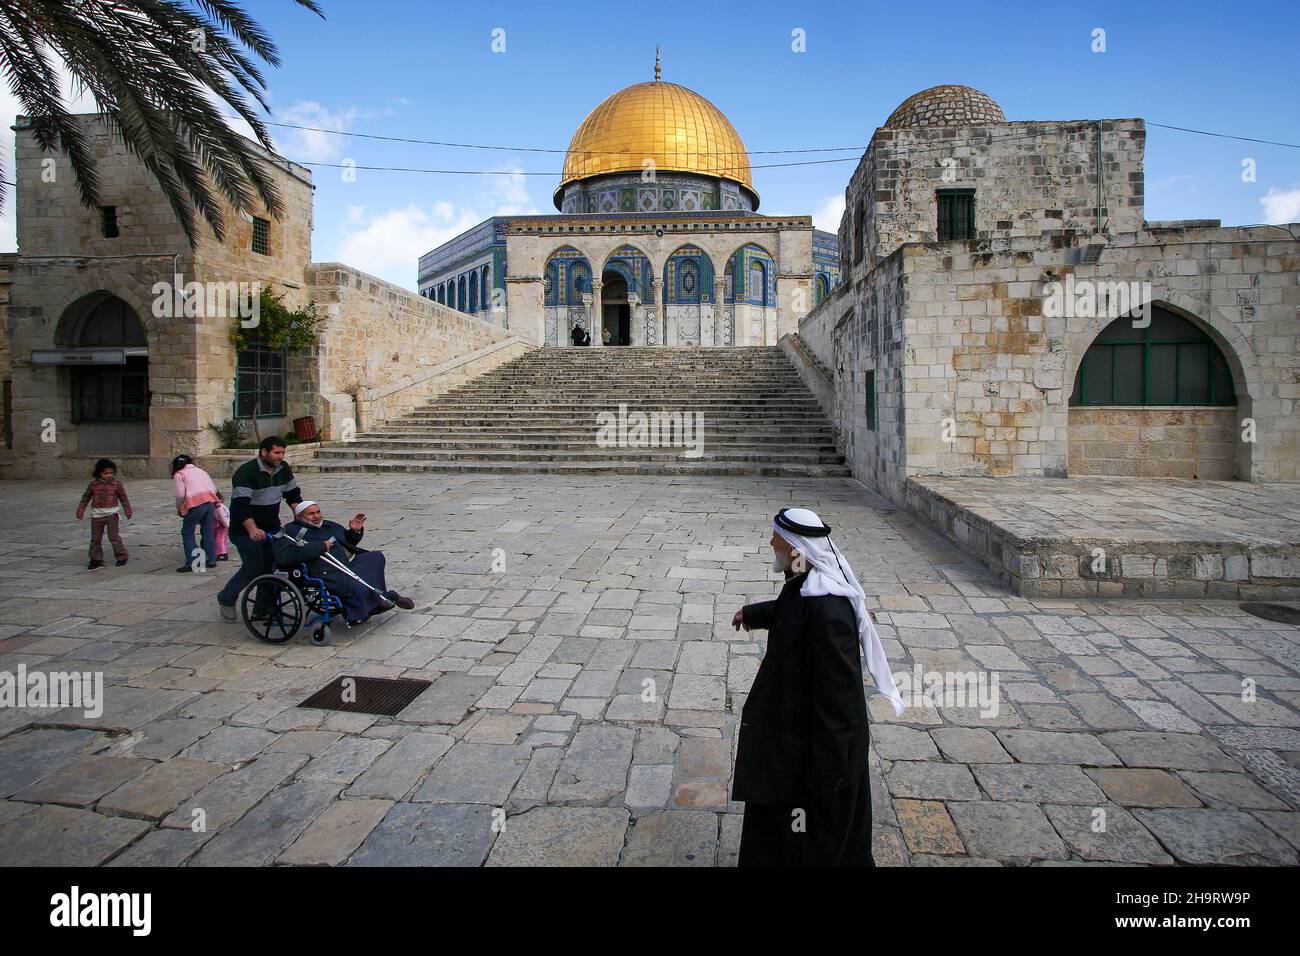 Mosque of Al-aqsa (Dome of the Rock) in Old Town. There are many historical buildings in the courtyard of Masjid Aksa Mosque. Stock Photo